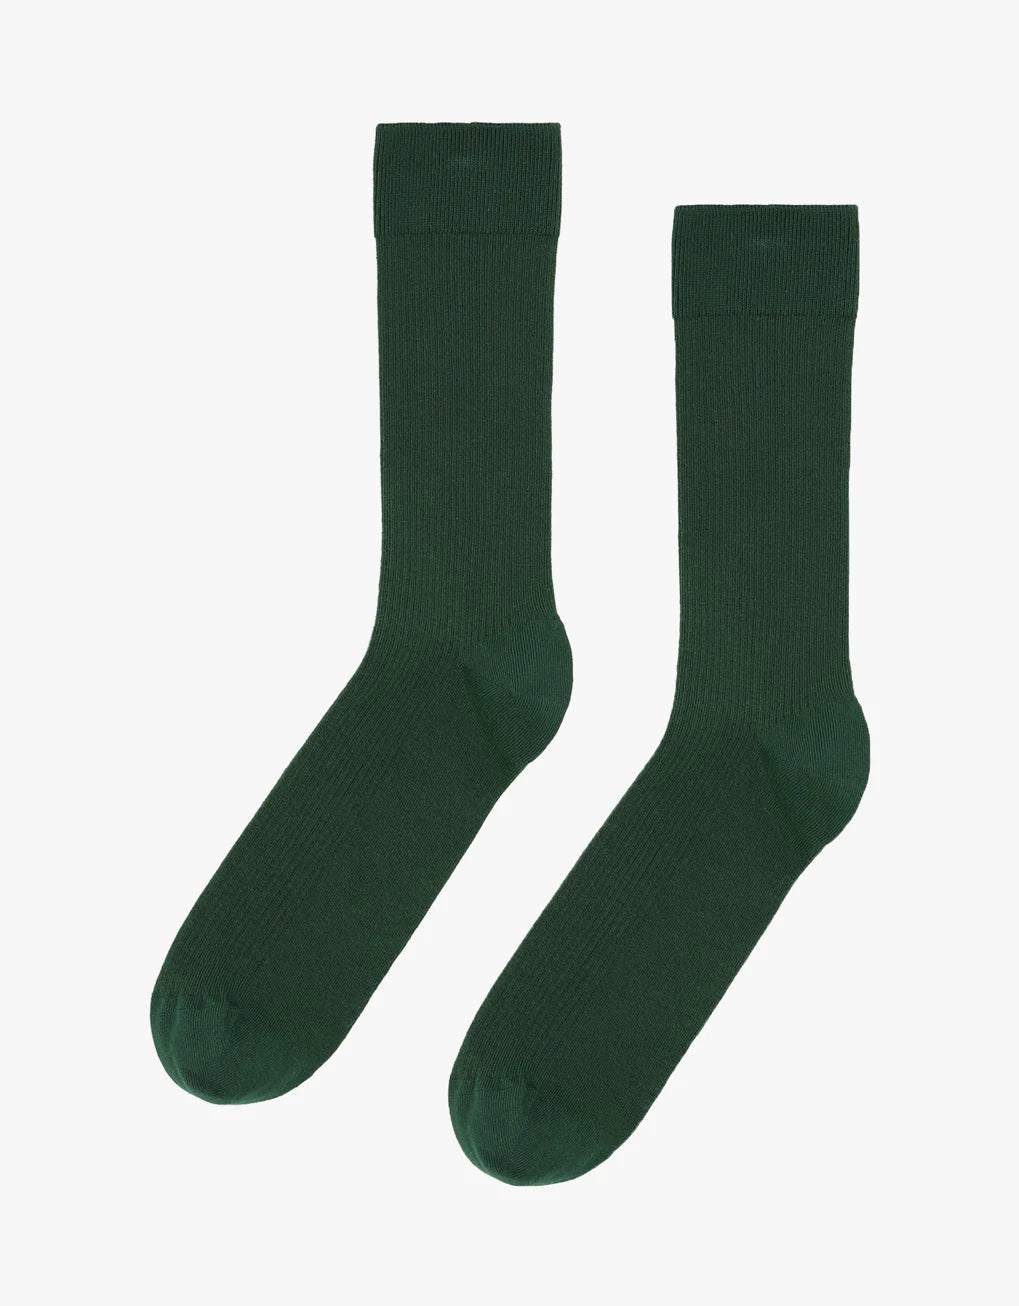 A pair of Colorful Standard Classic Organic Socks on a white background, seamless and breathable.